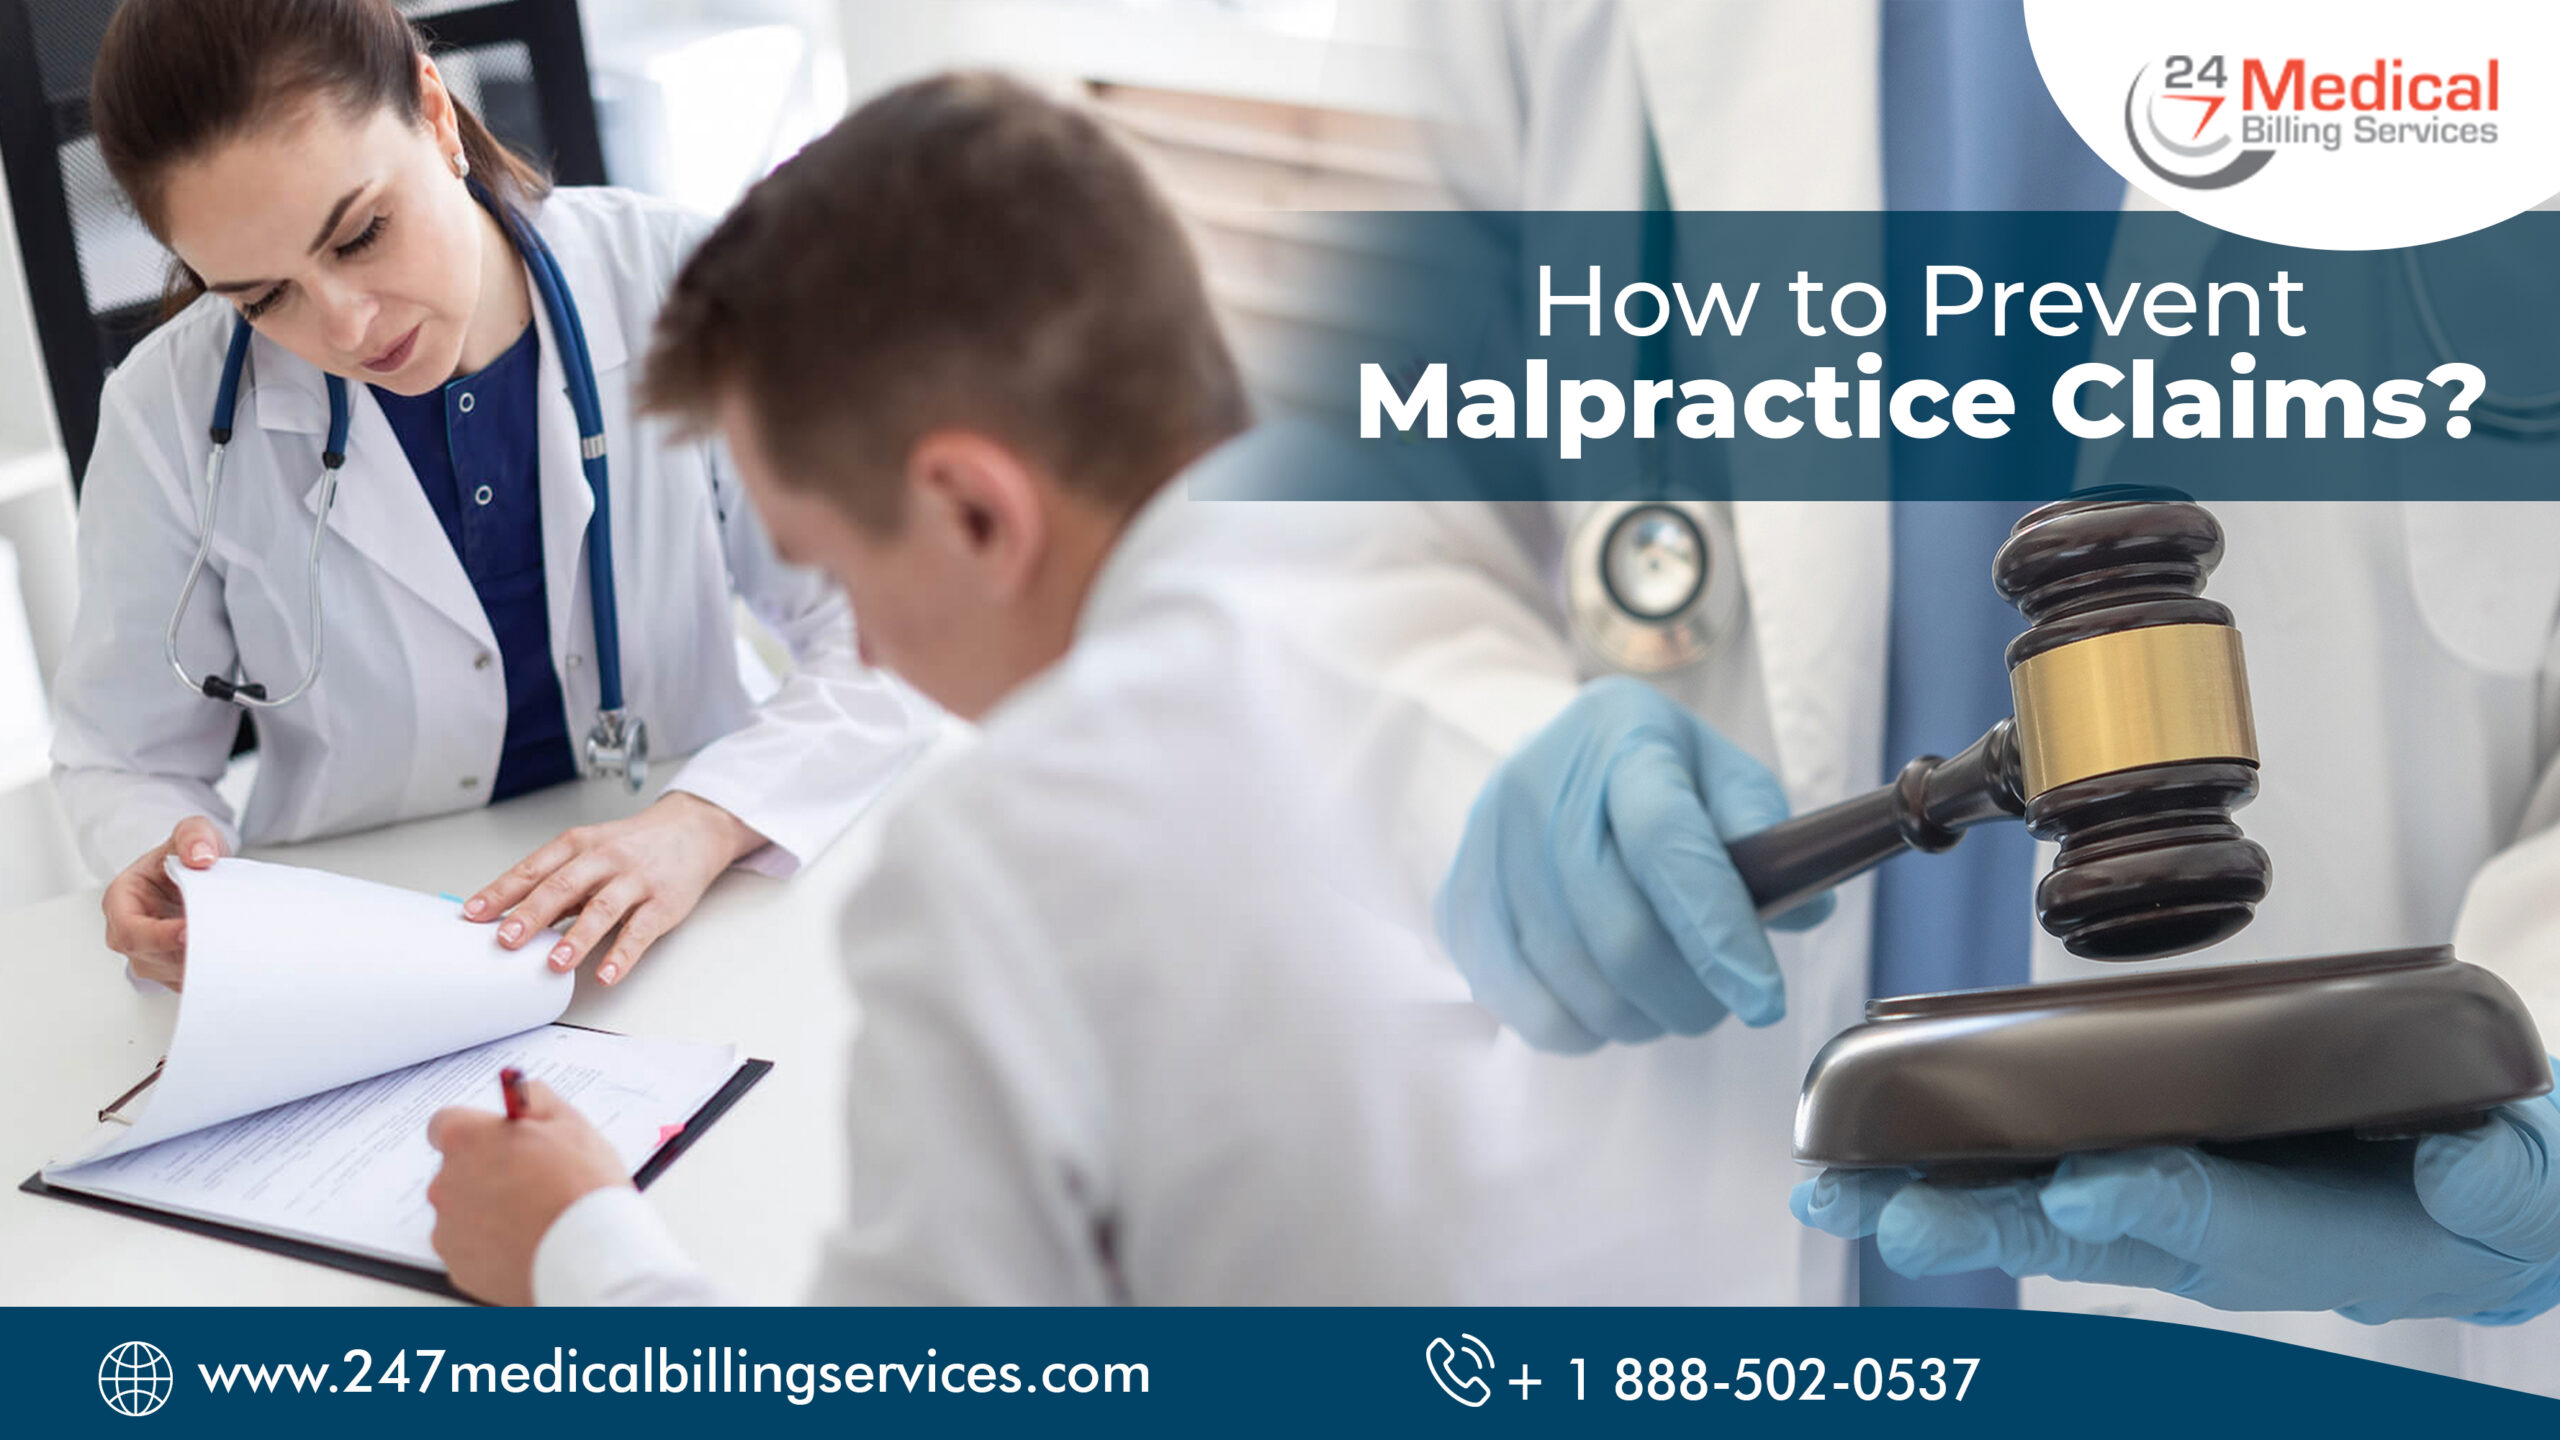  How to prevent Malpractice Claims?